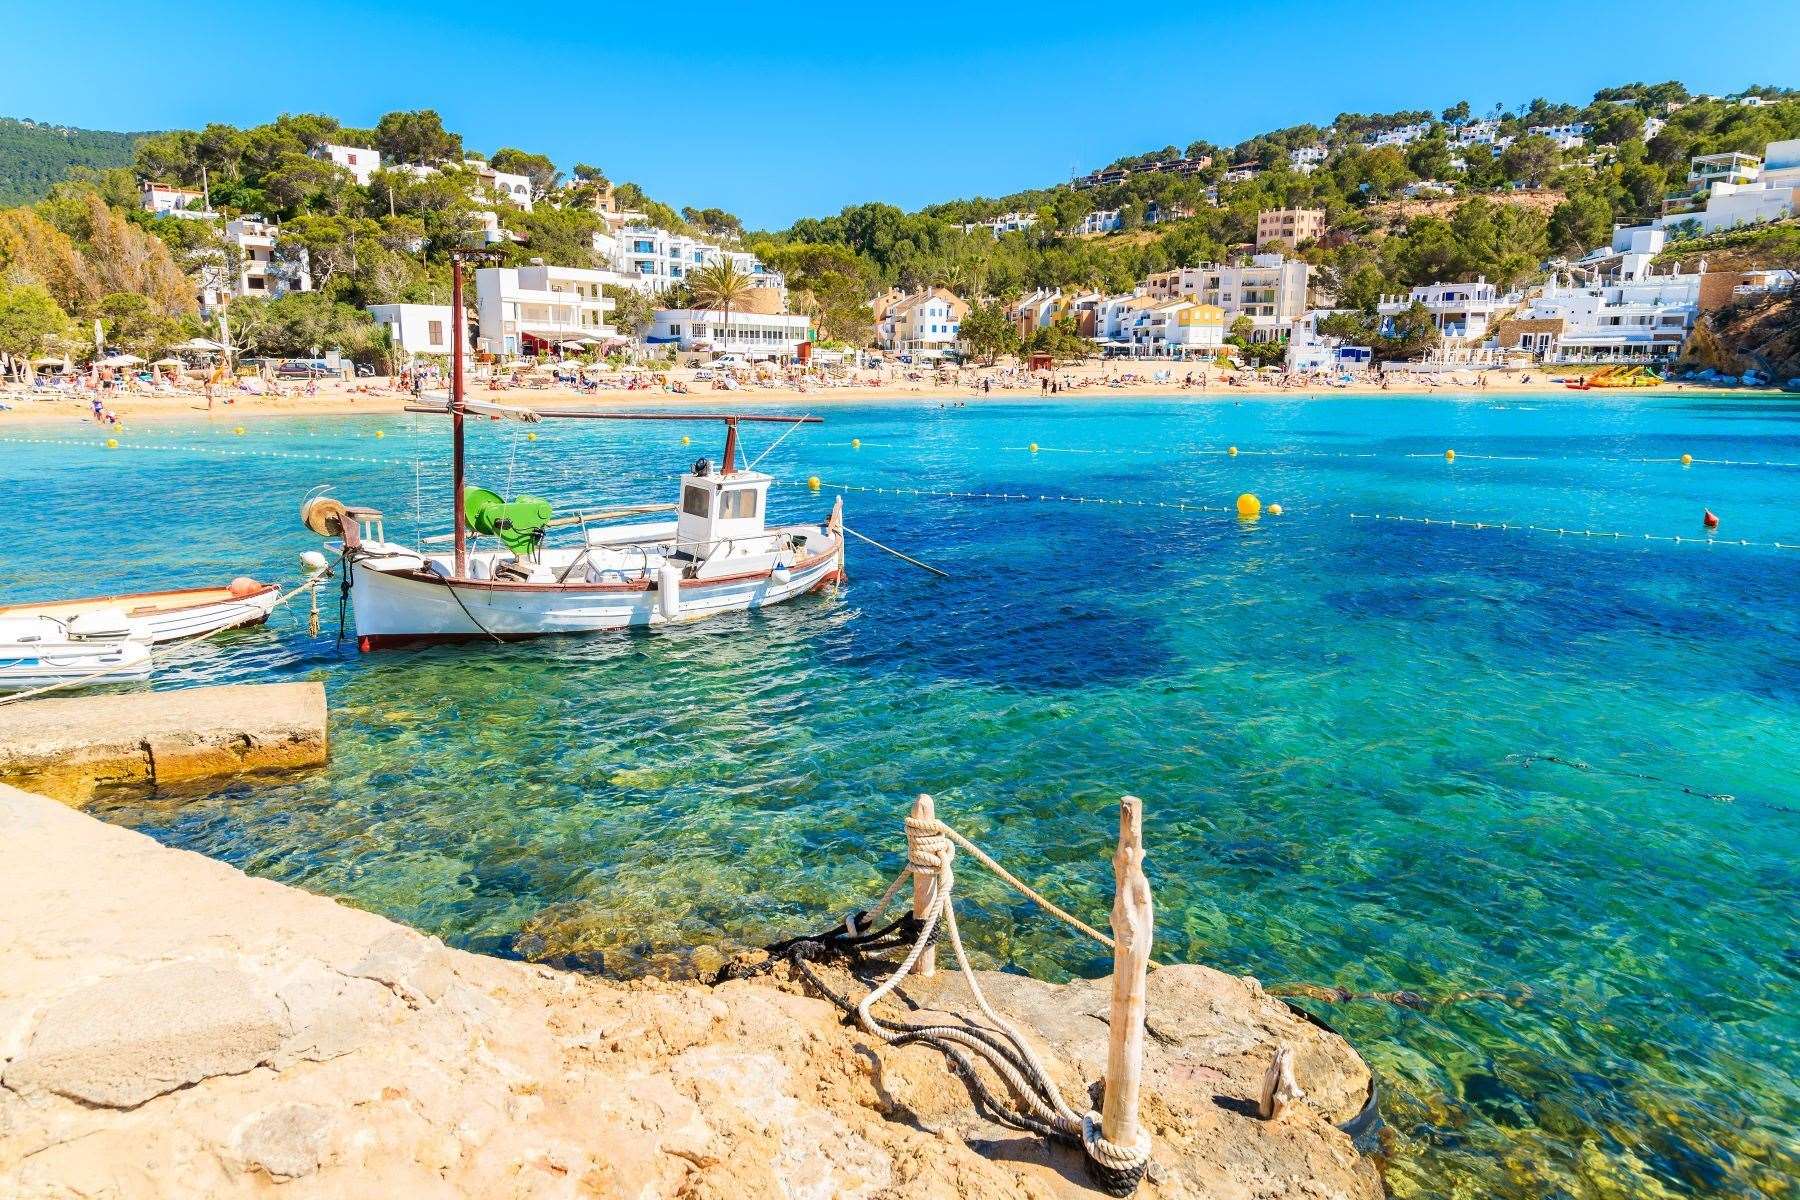 Ibiza came in third place for Kent holiday-goers